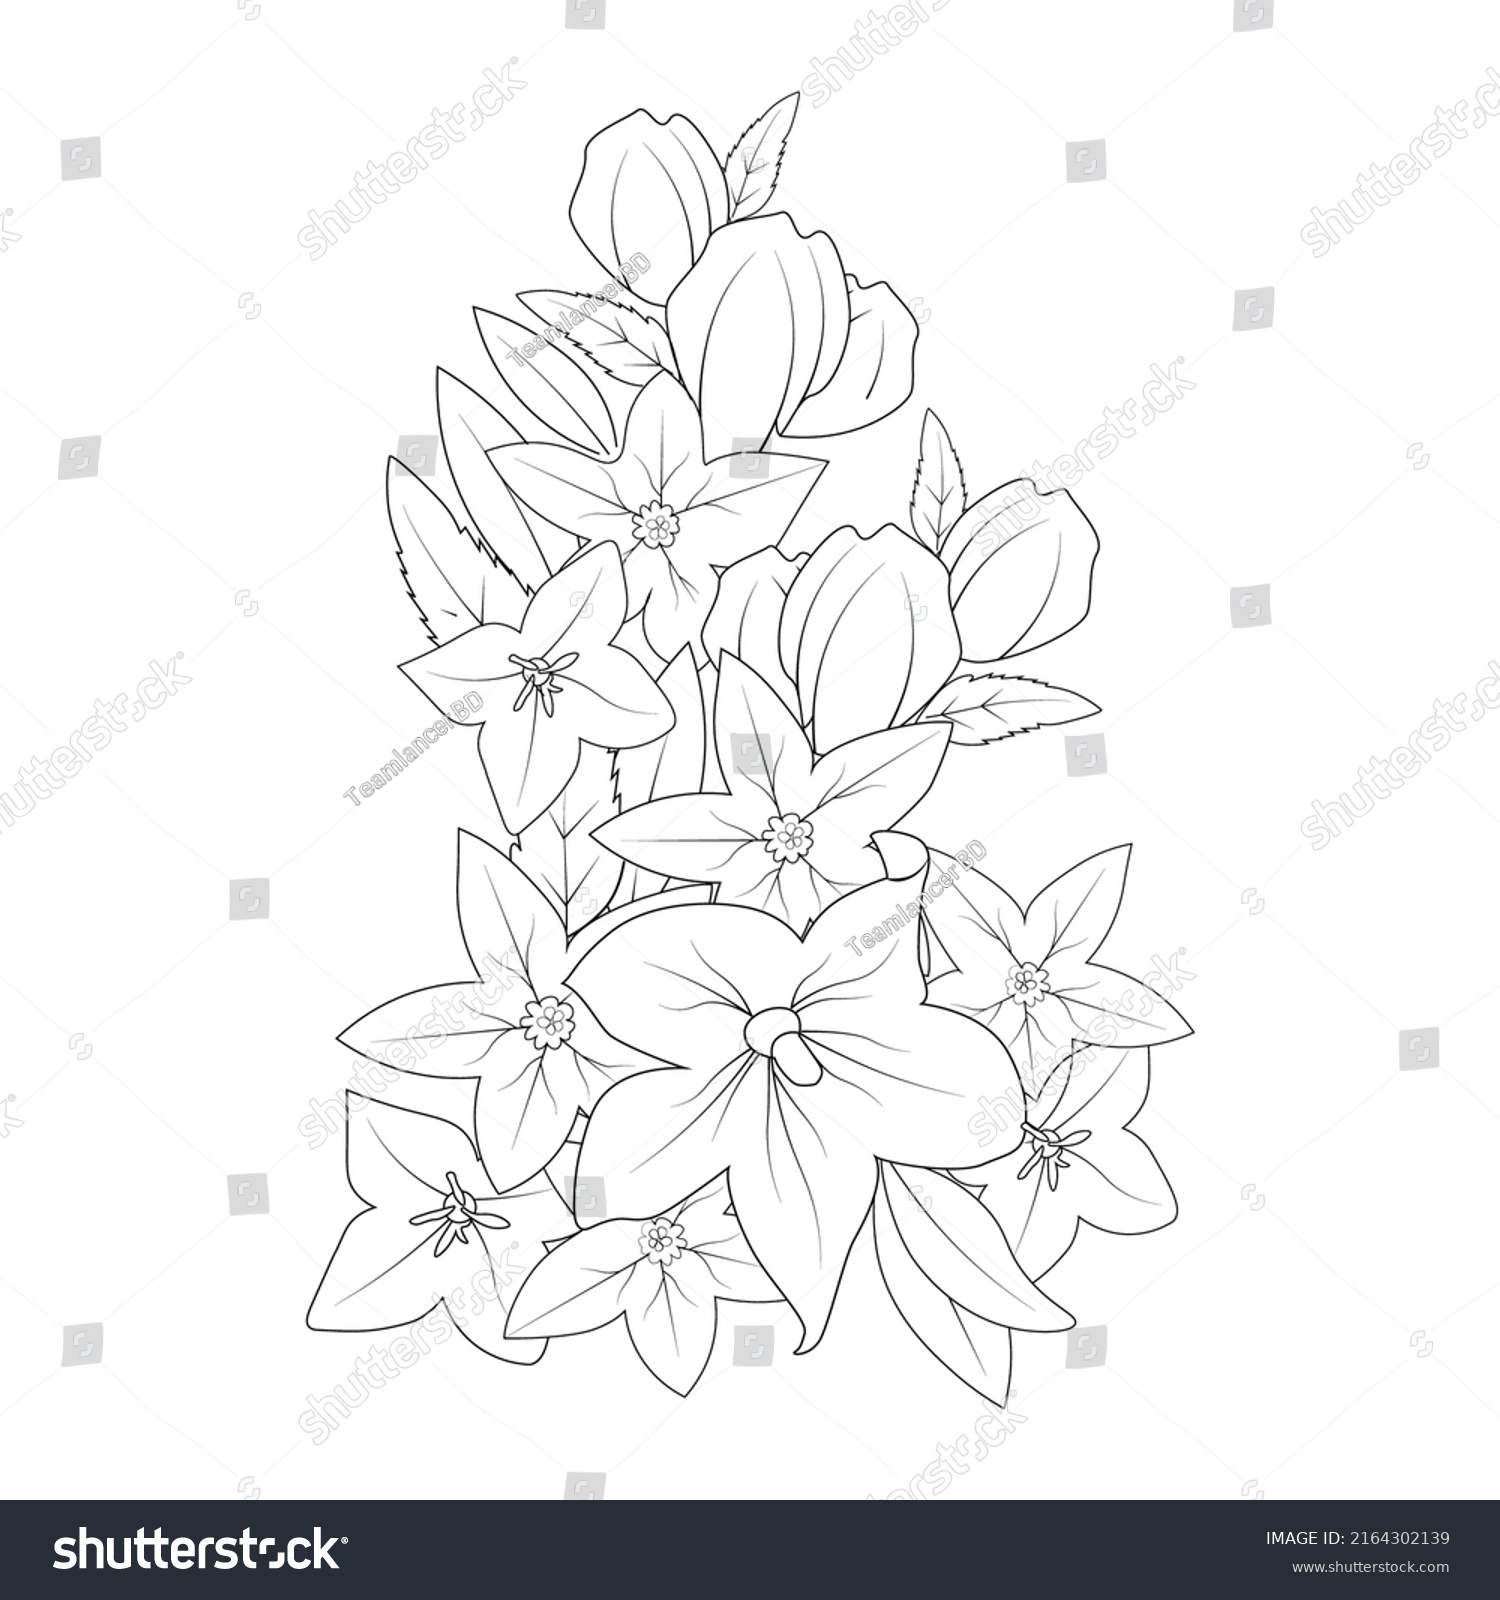 Bell Flower Drawing Coloring Page Doodle Stock Vector (Royalty Free ...